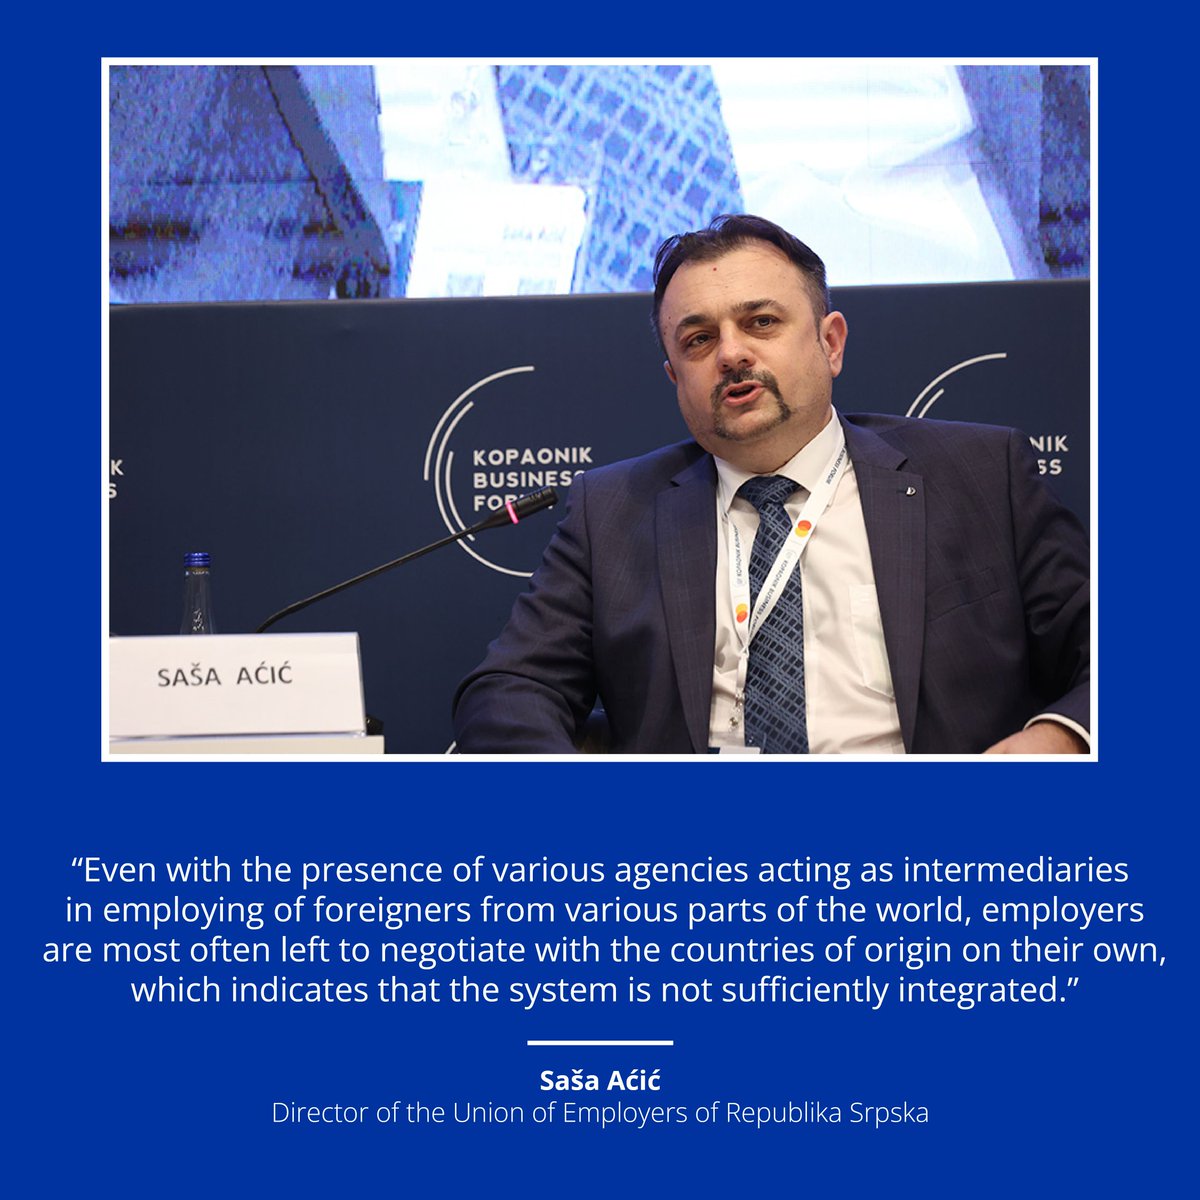 To harness the potential of labor migration, we need ambitious skill mobility strategies in place across #WesternBalkans 
#KBF2024
#kopaonikbusinessforum